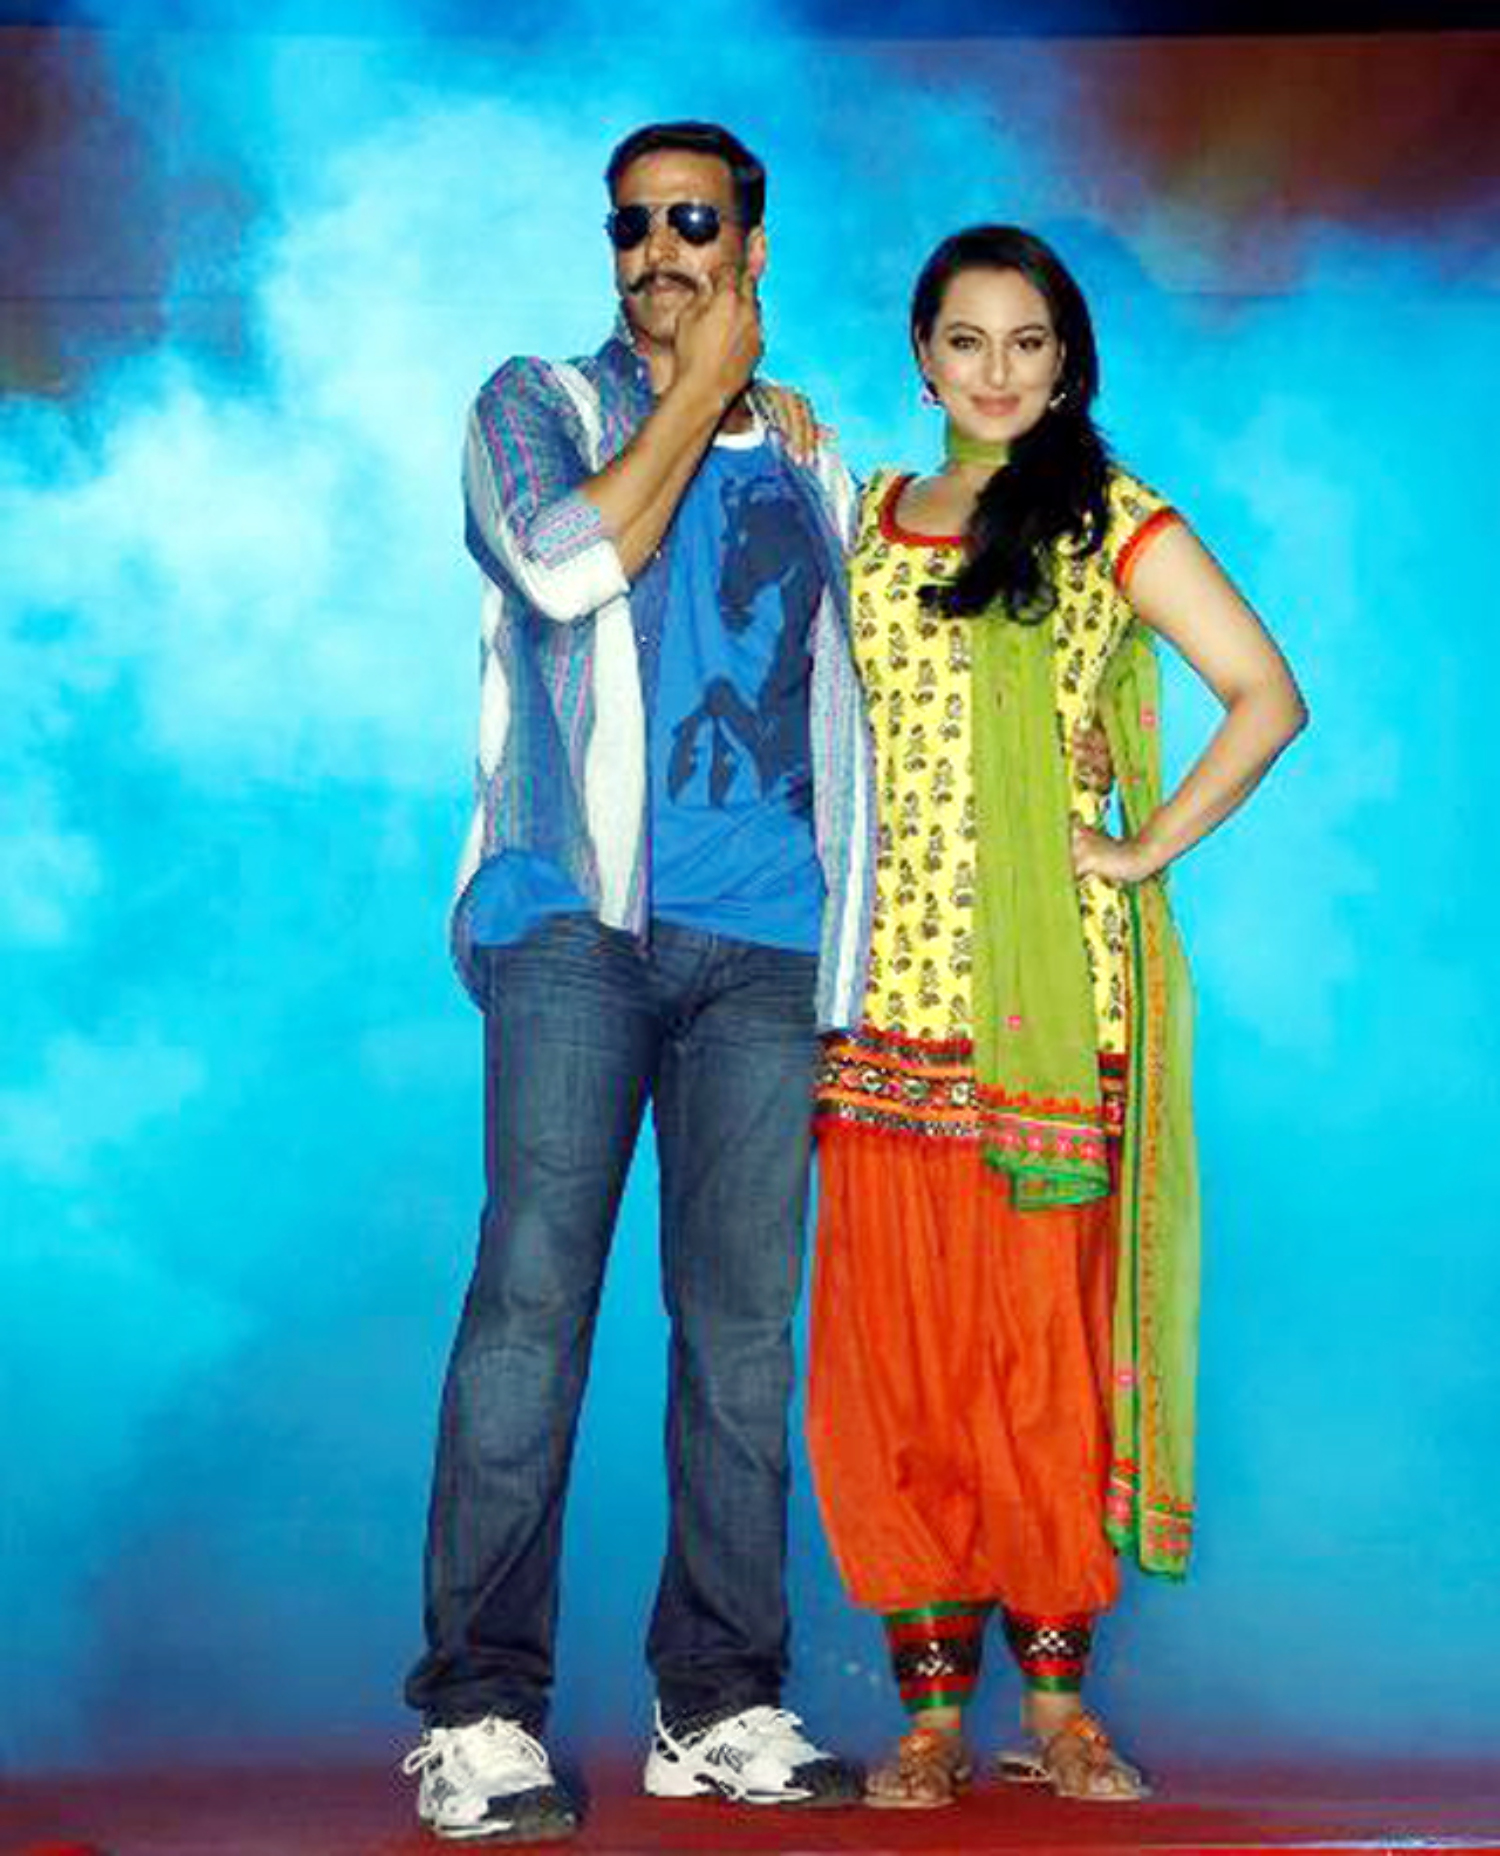 Sonakshi Sinha With Akshay Kumar At Film Rowdy Rathore First Look Launch At Bdd Chawl Grounds In